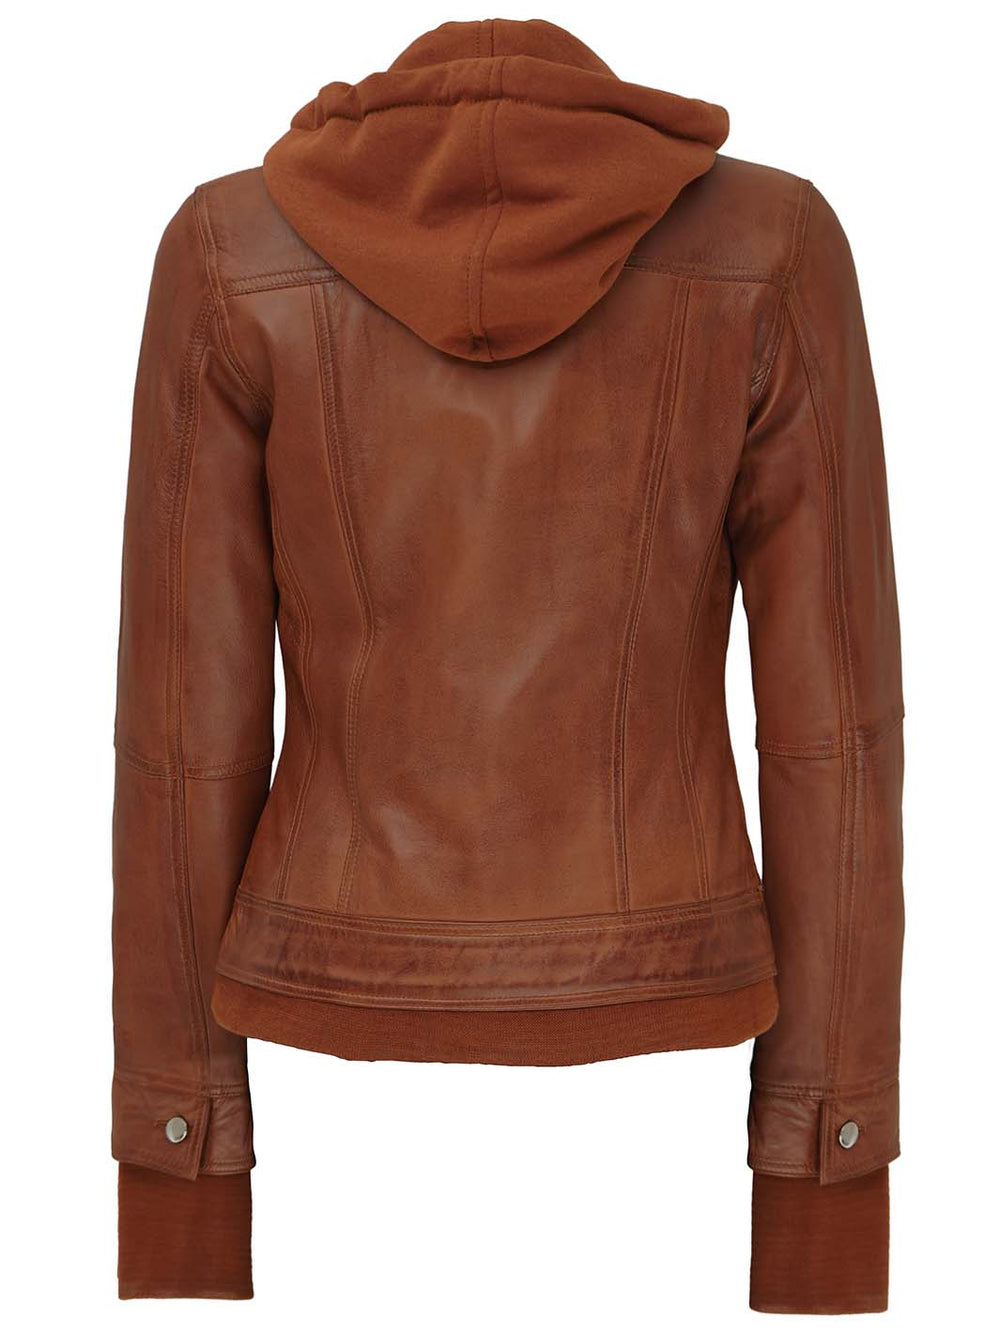 hooded leather jacket womens